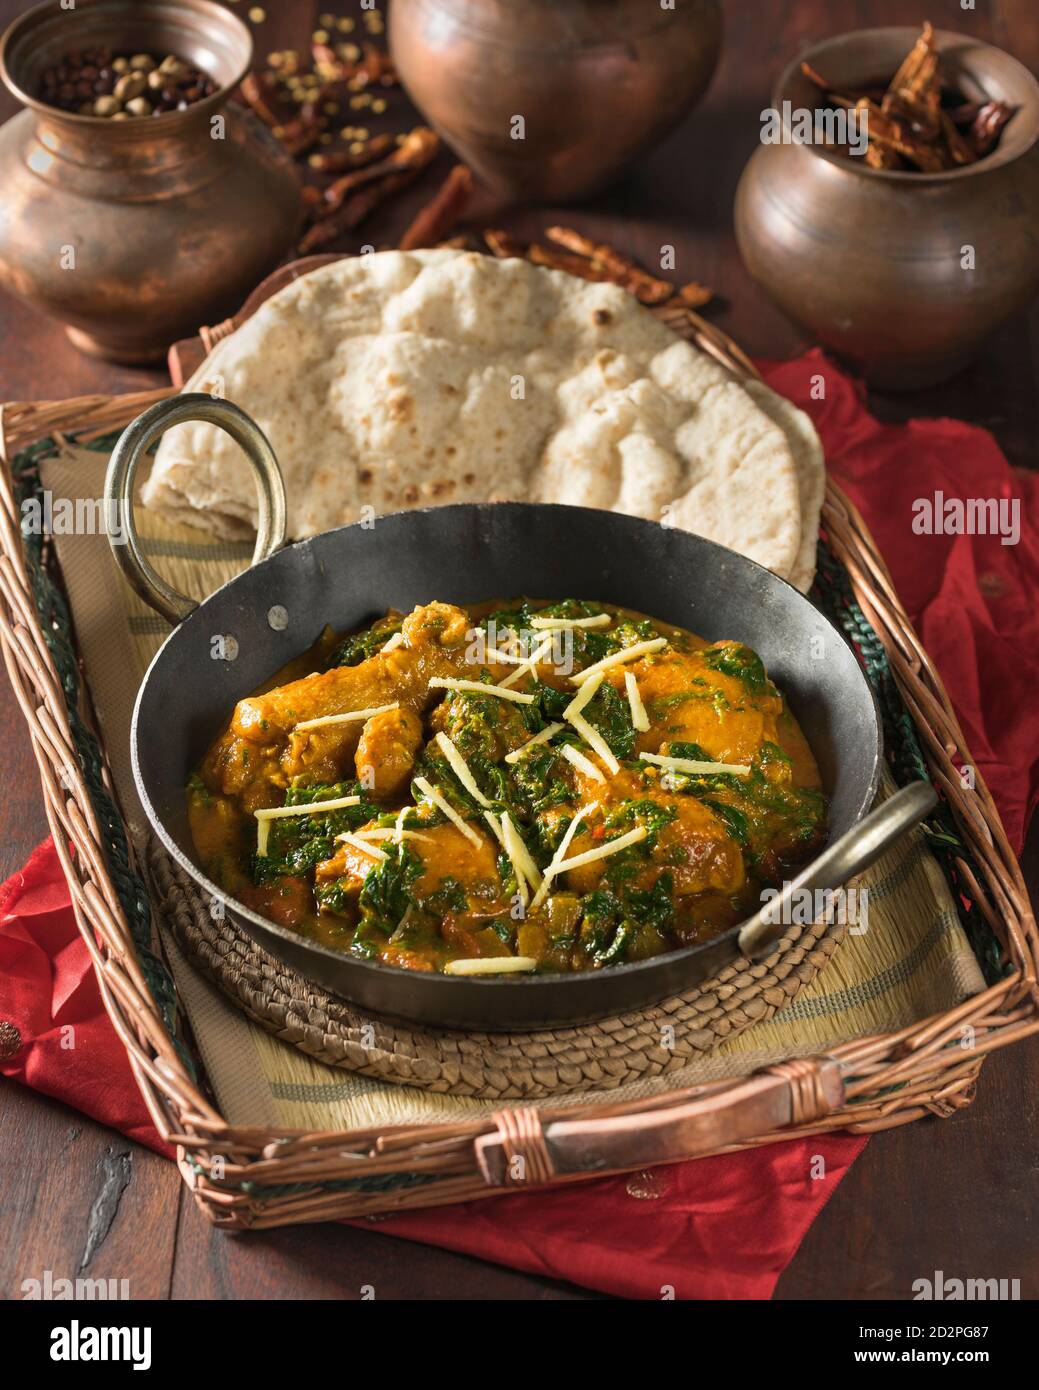 Palak murgh. Chicken and spinach curry. India Food Stock Photo